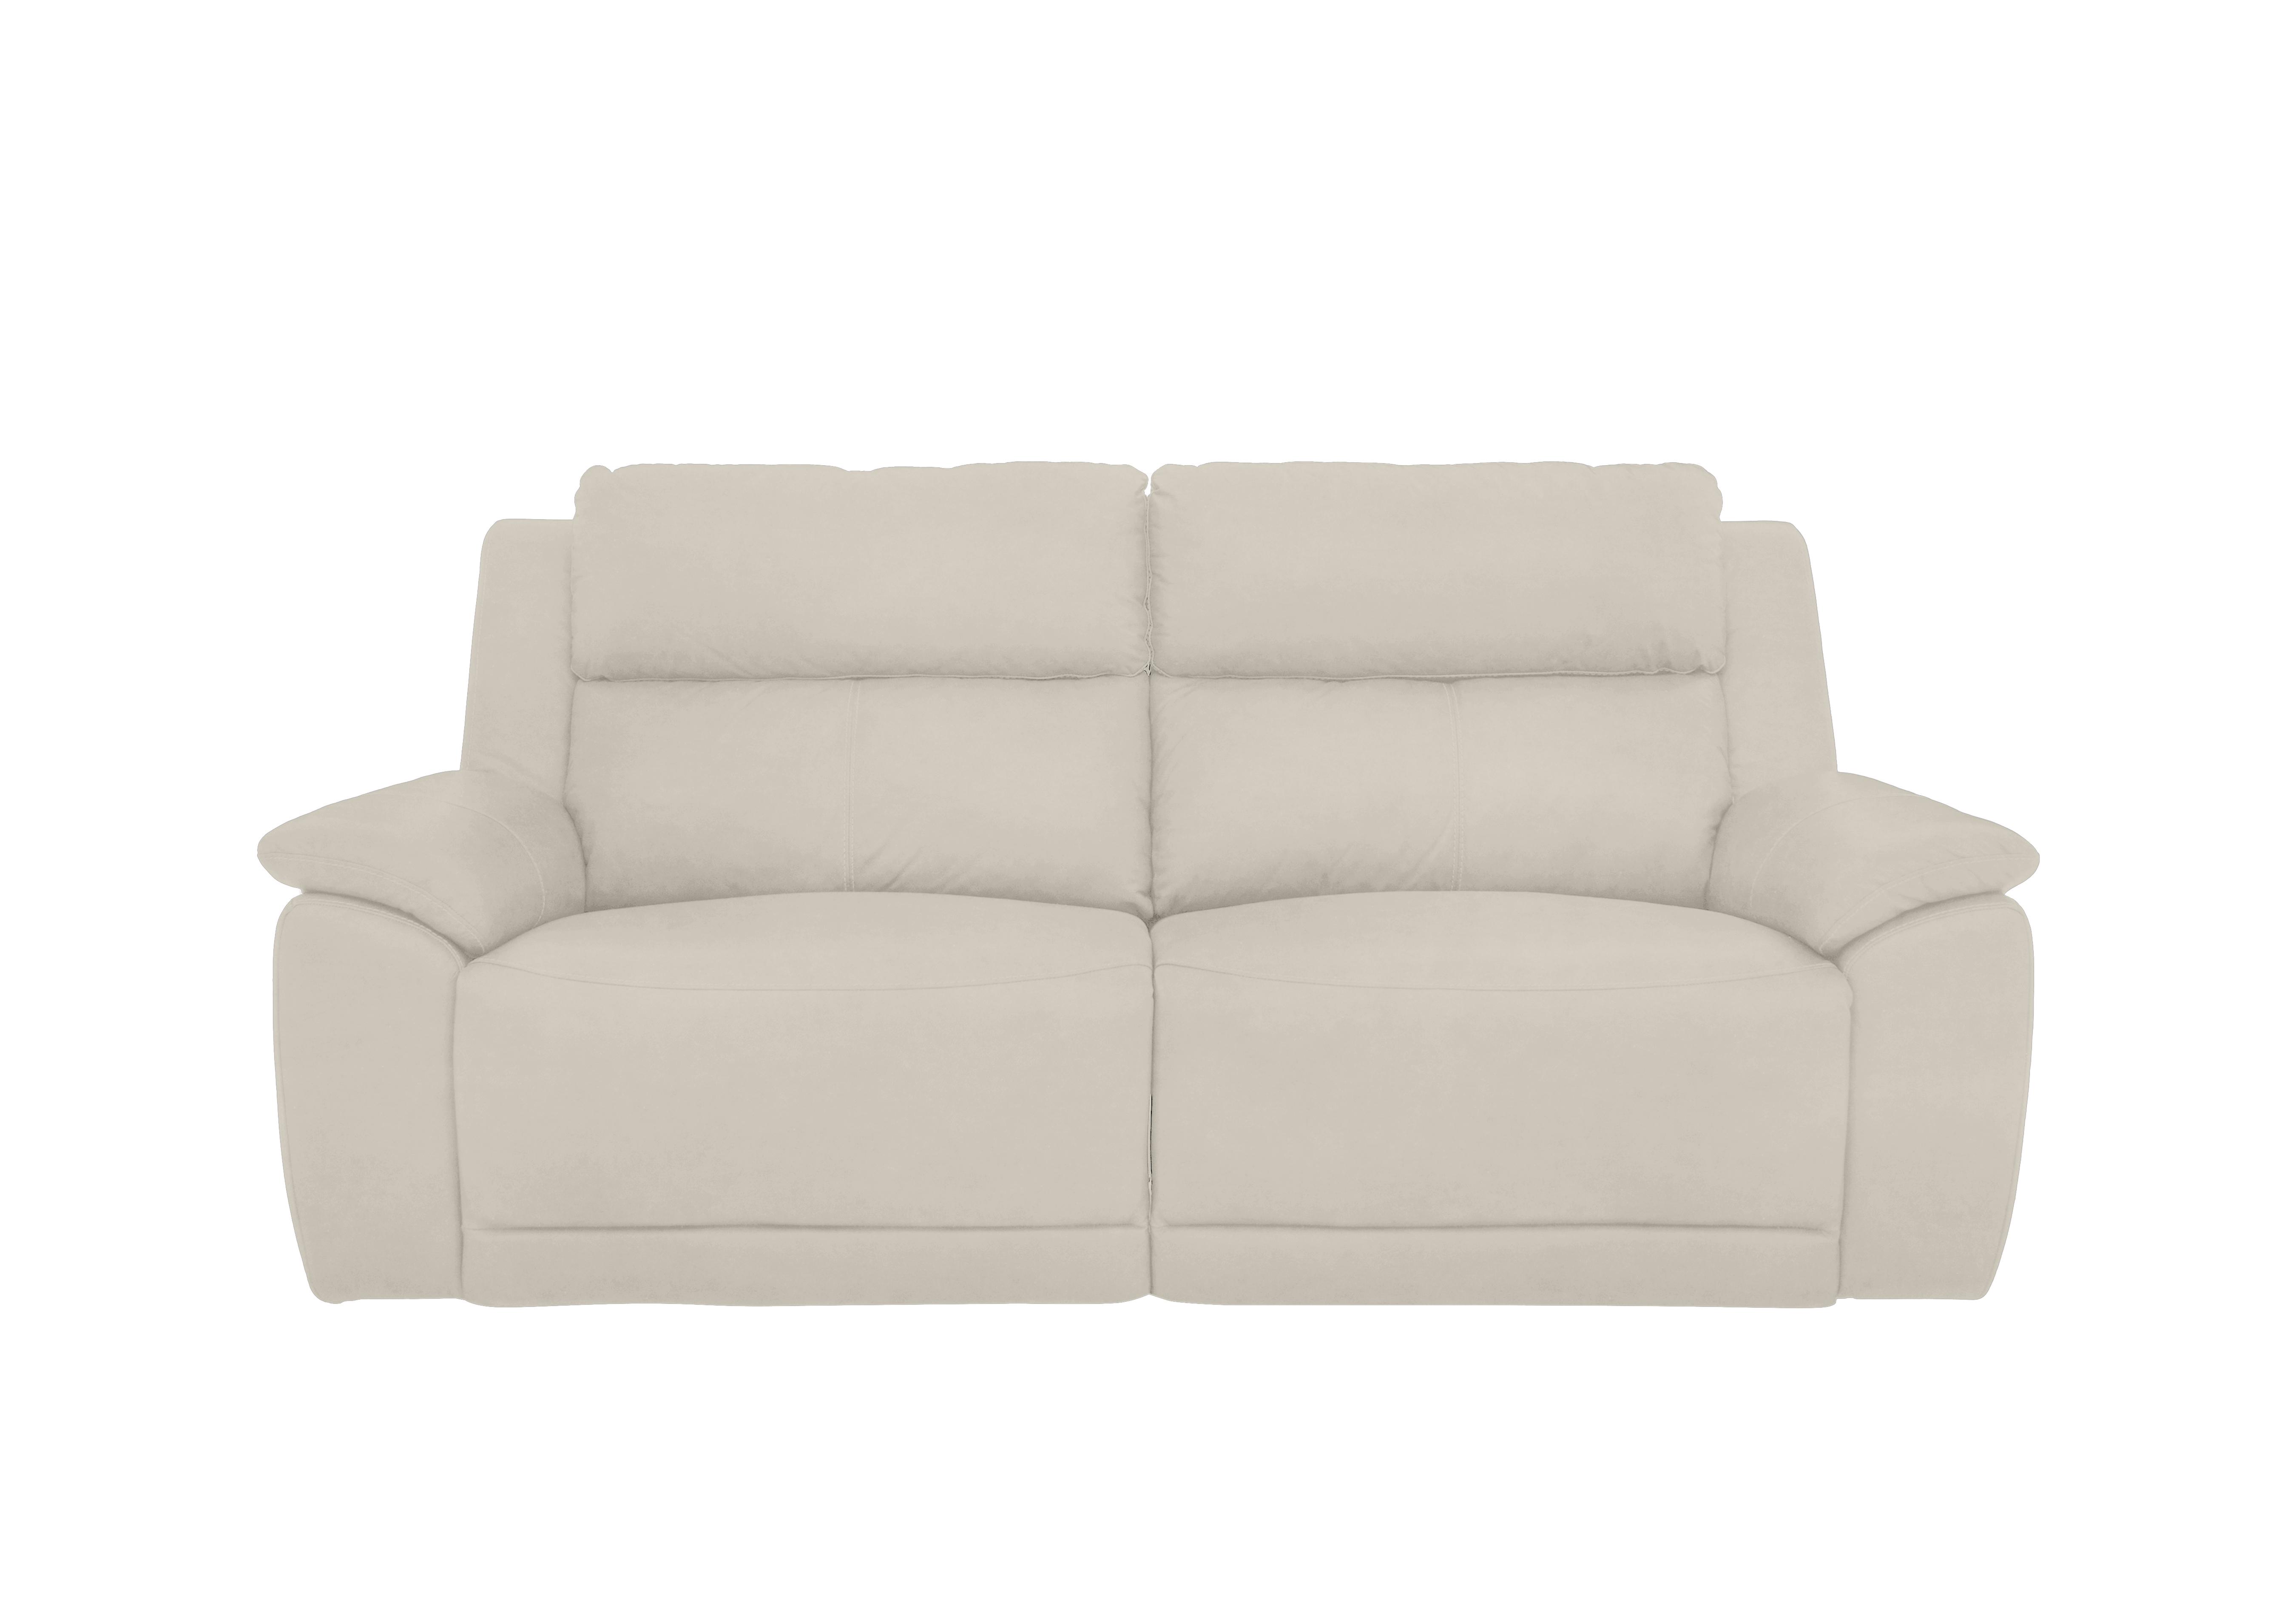 Utah 3 Seater Fabric Power Recliner Sofa with Power Headrests and Power Lumbar in Velvet White Vv-0307 on Furniture Village